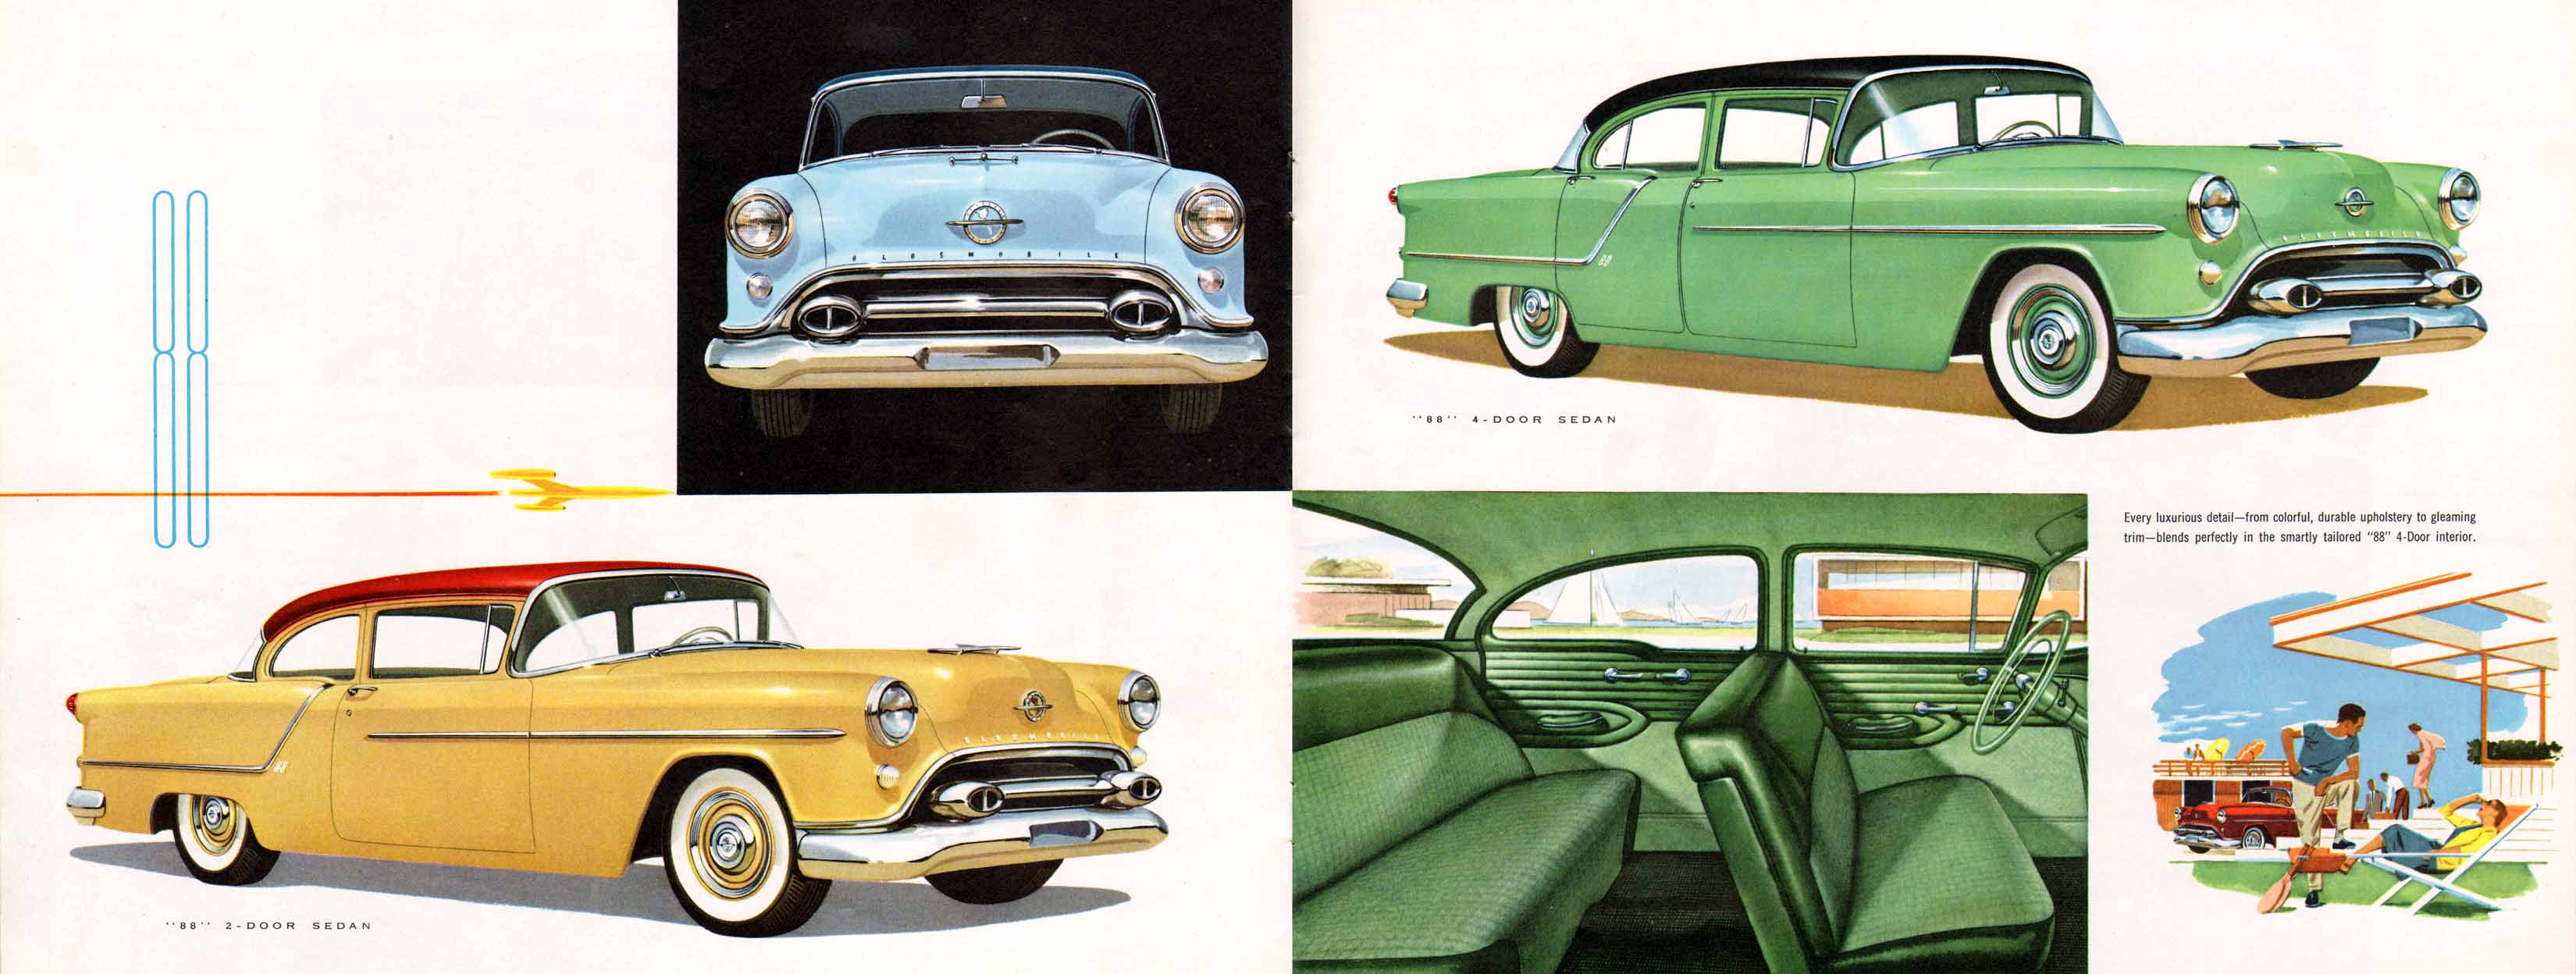 1954 Oldsmobile-a19-a20